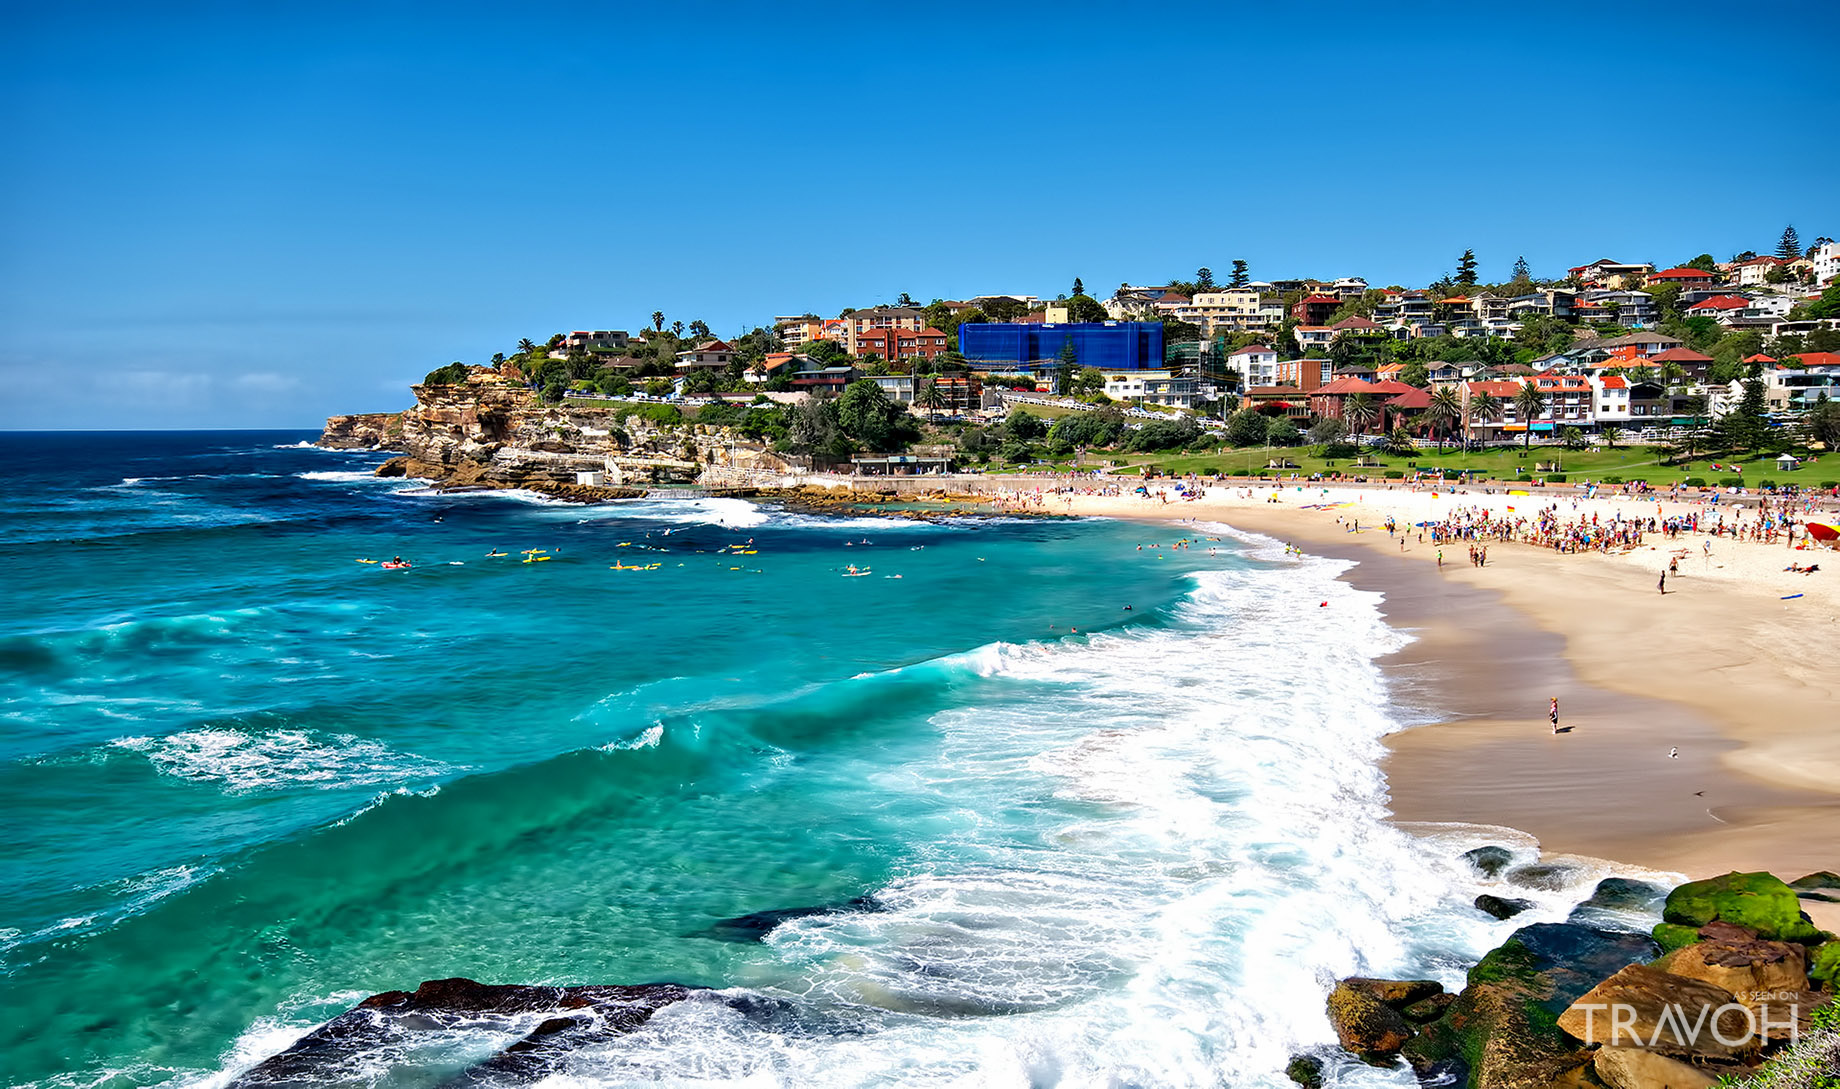 Unmissable Tour for all Travellers - Four excellent Beaches in Sydney, Australia